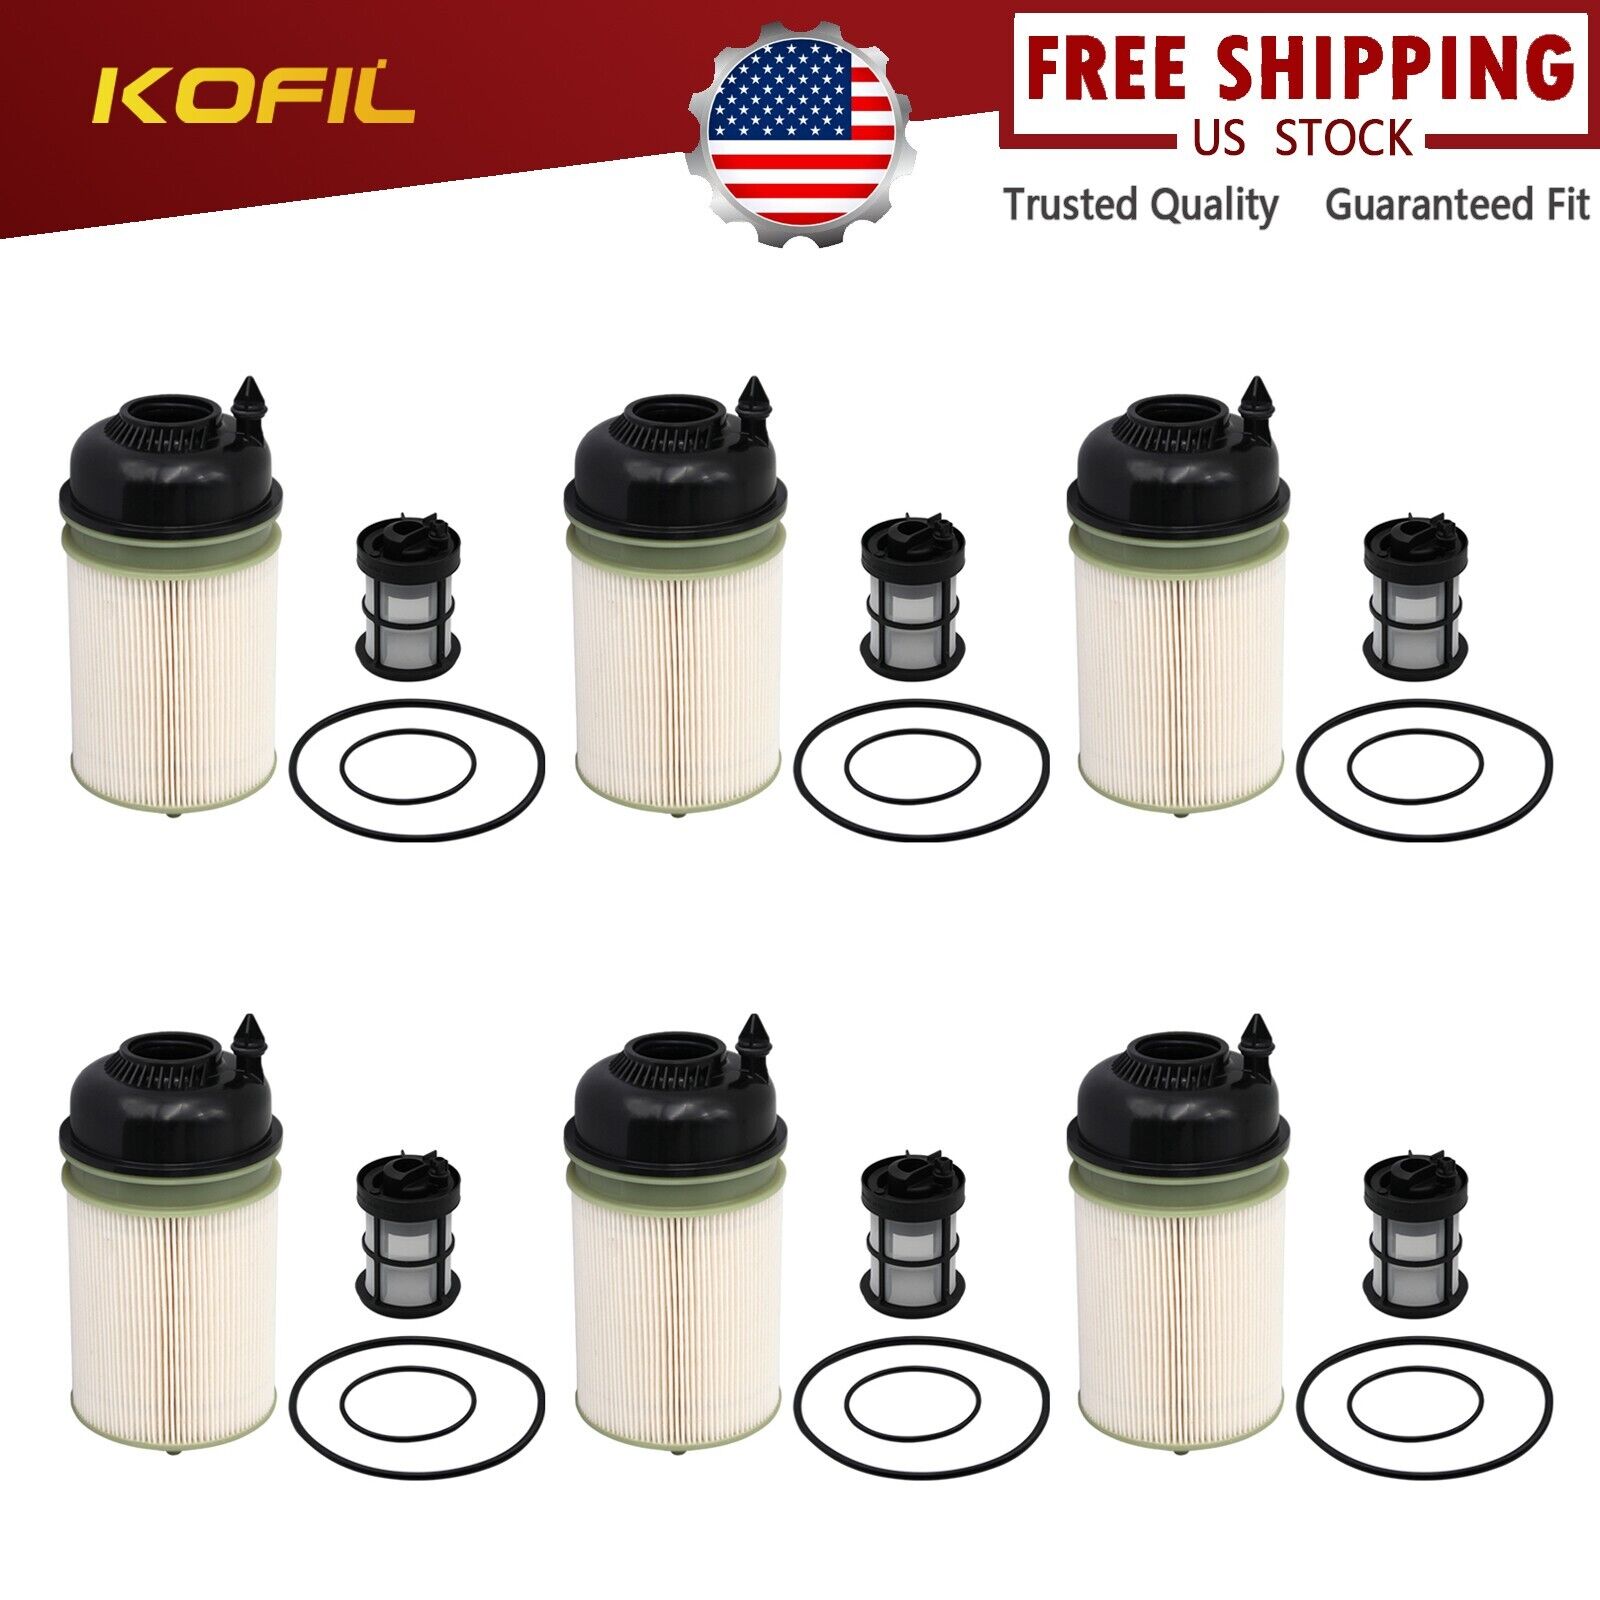 6X A4720921705 Fuel Filter Kit, for DD13, DD15 and DD16 Engines